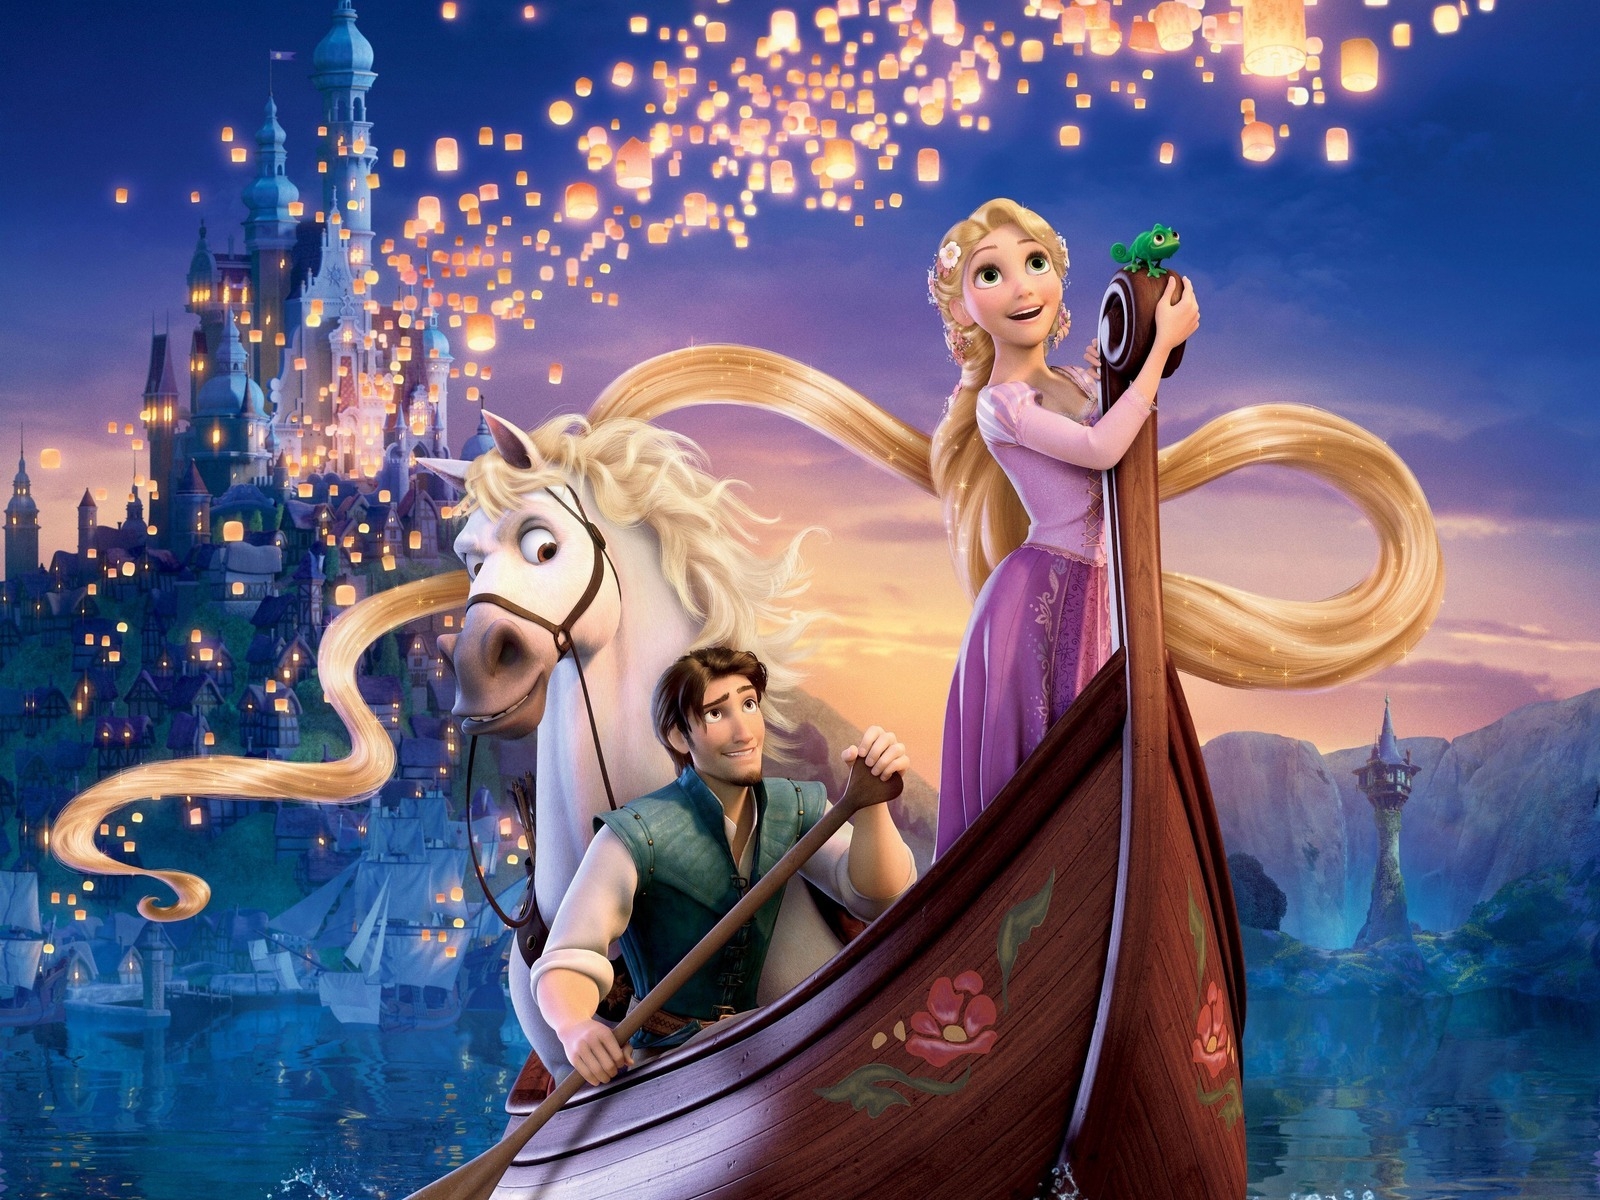 Tangled Musical Film for 1600 x 1200 resolution